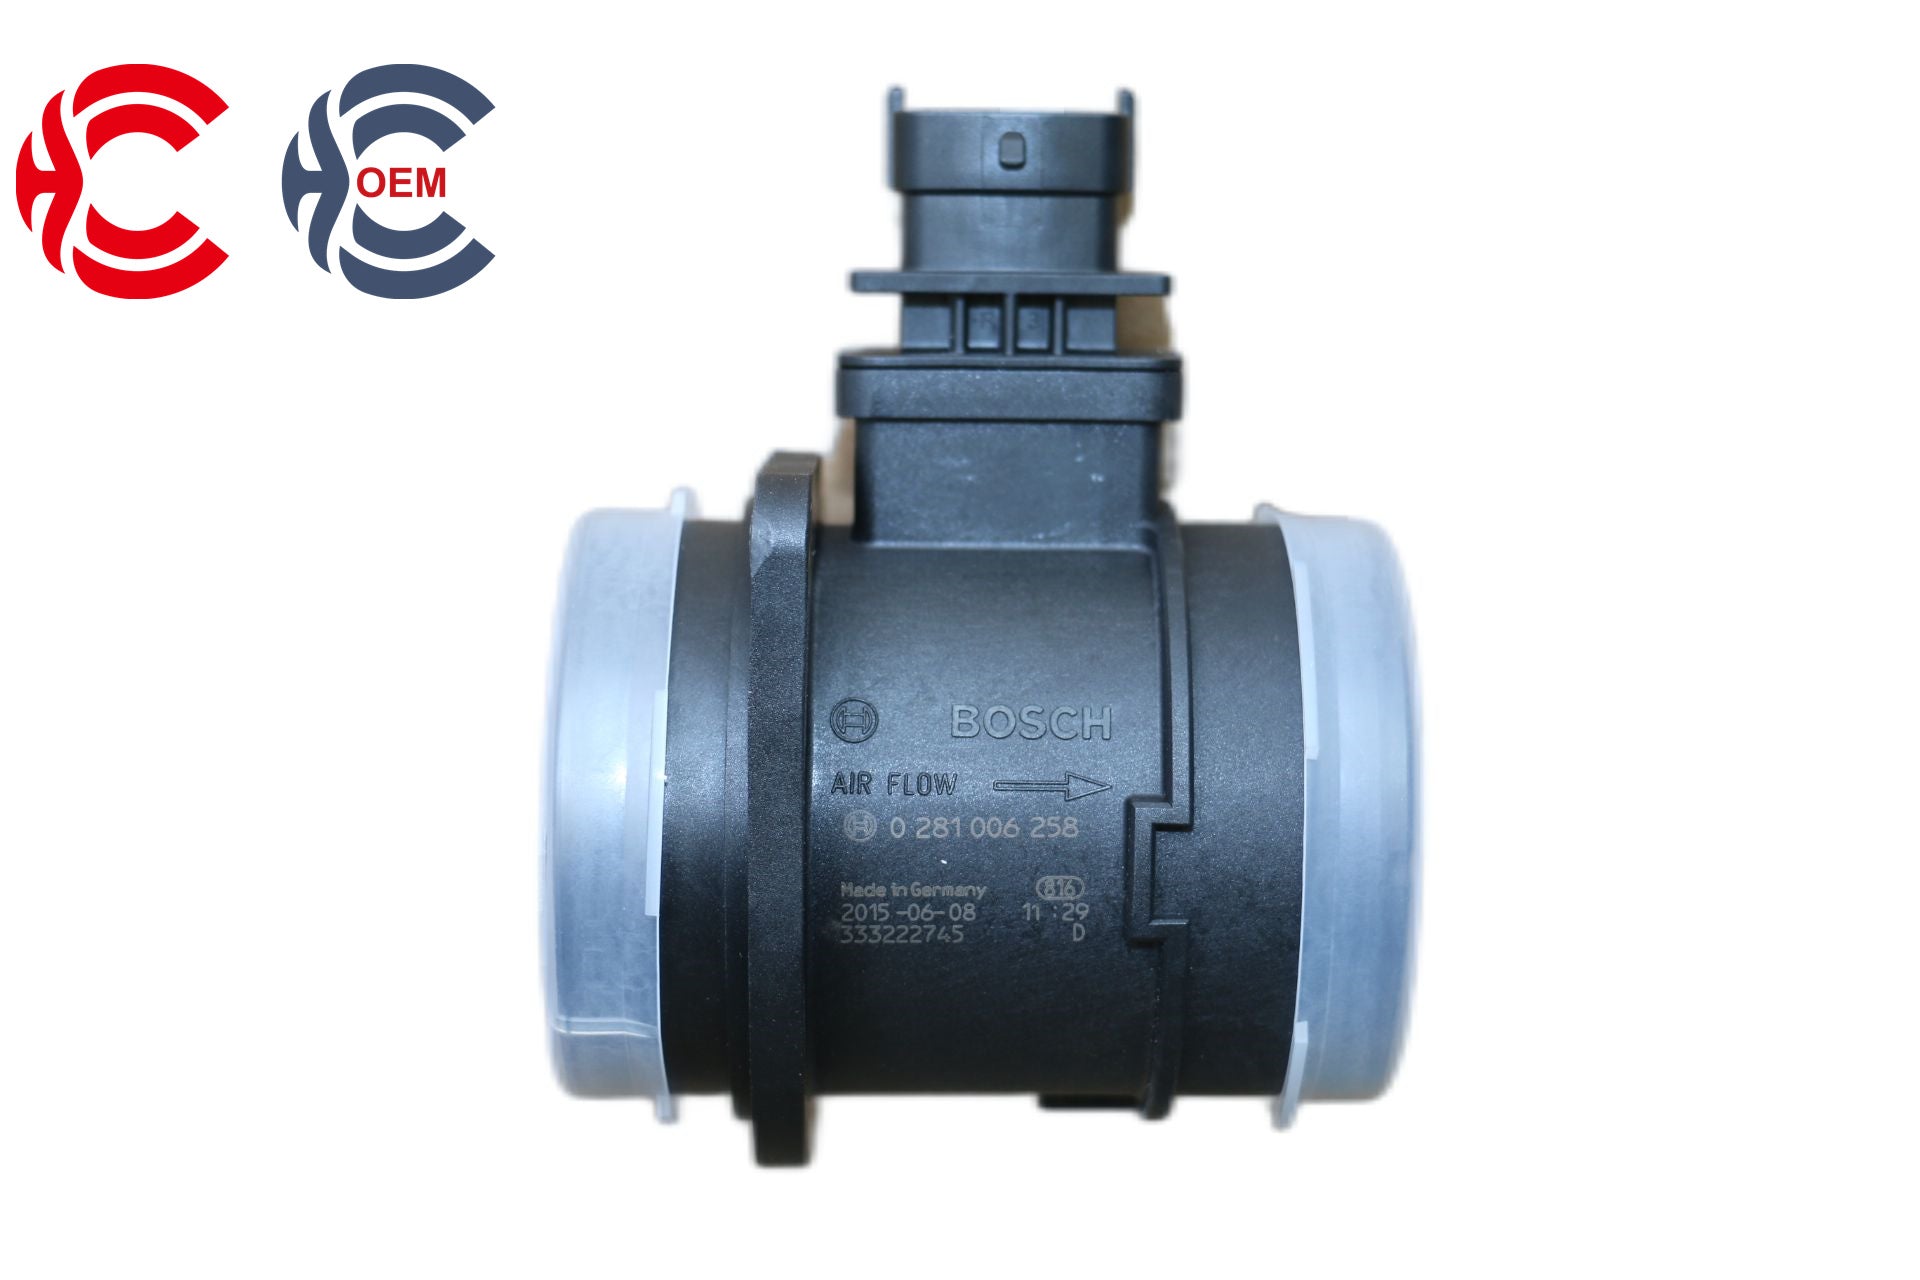 OEM: 0281006258Material: ABSColor: BlackOrigin: Made in ChinaWeight: 200gPacking List: 1* Air Flow Sensor Sensor More ServiceWe can provide OEM Manufacturing serviceWe can Be your one-step solution for Auto PartsWe can provide technical scheme for you Feel Free to Contact Us, We will get back to you as soon as possible.